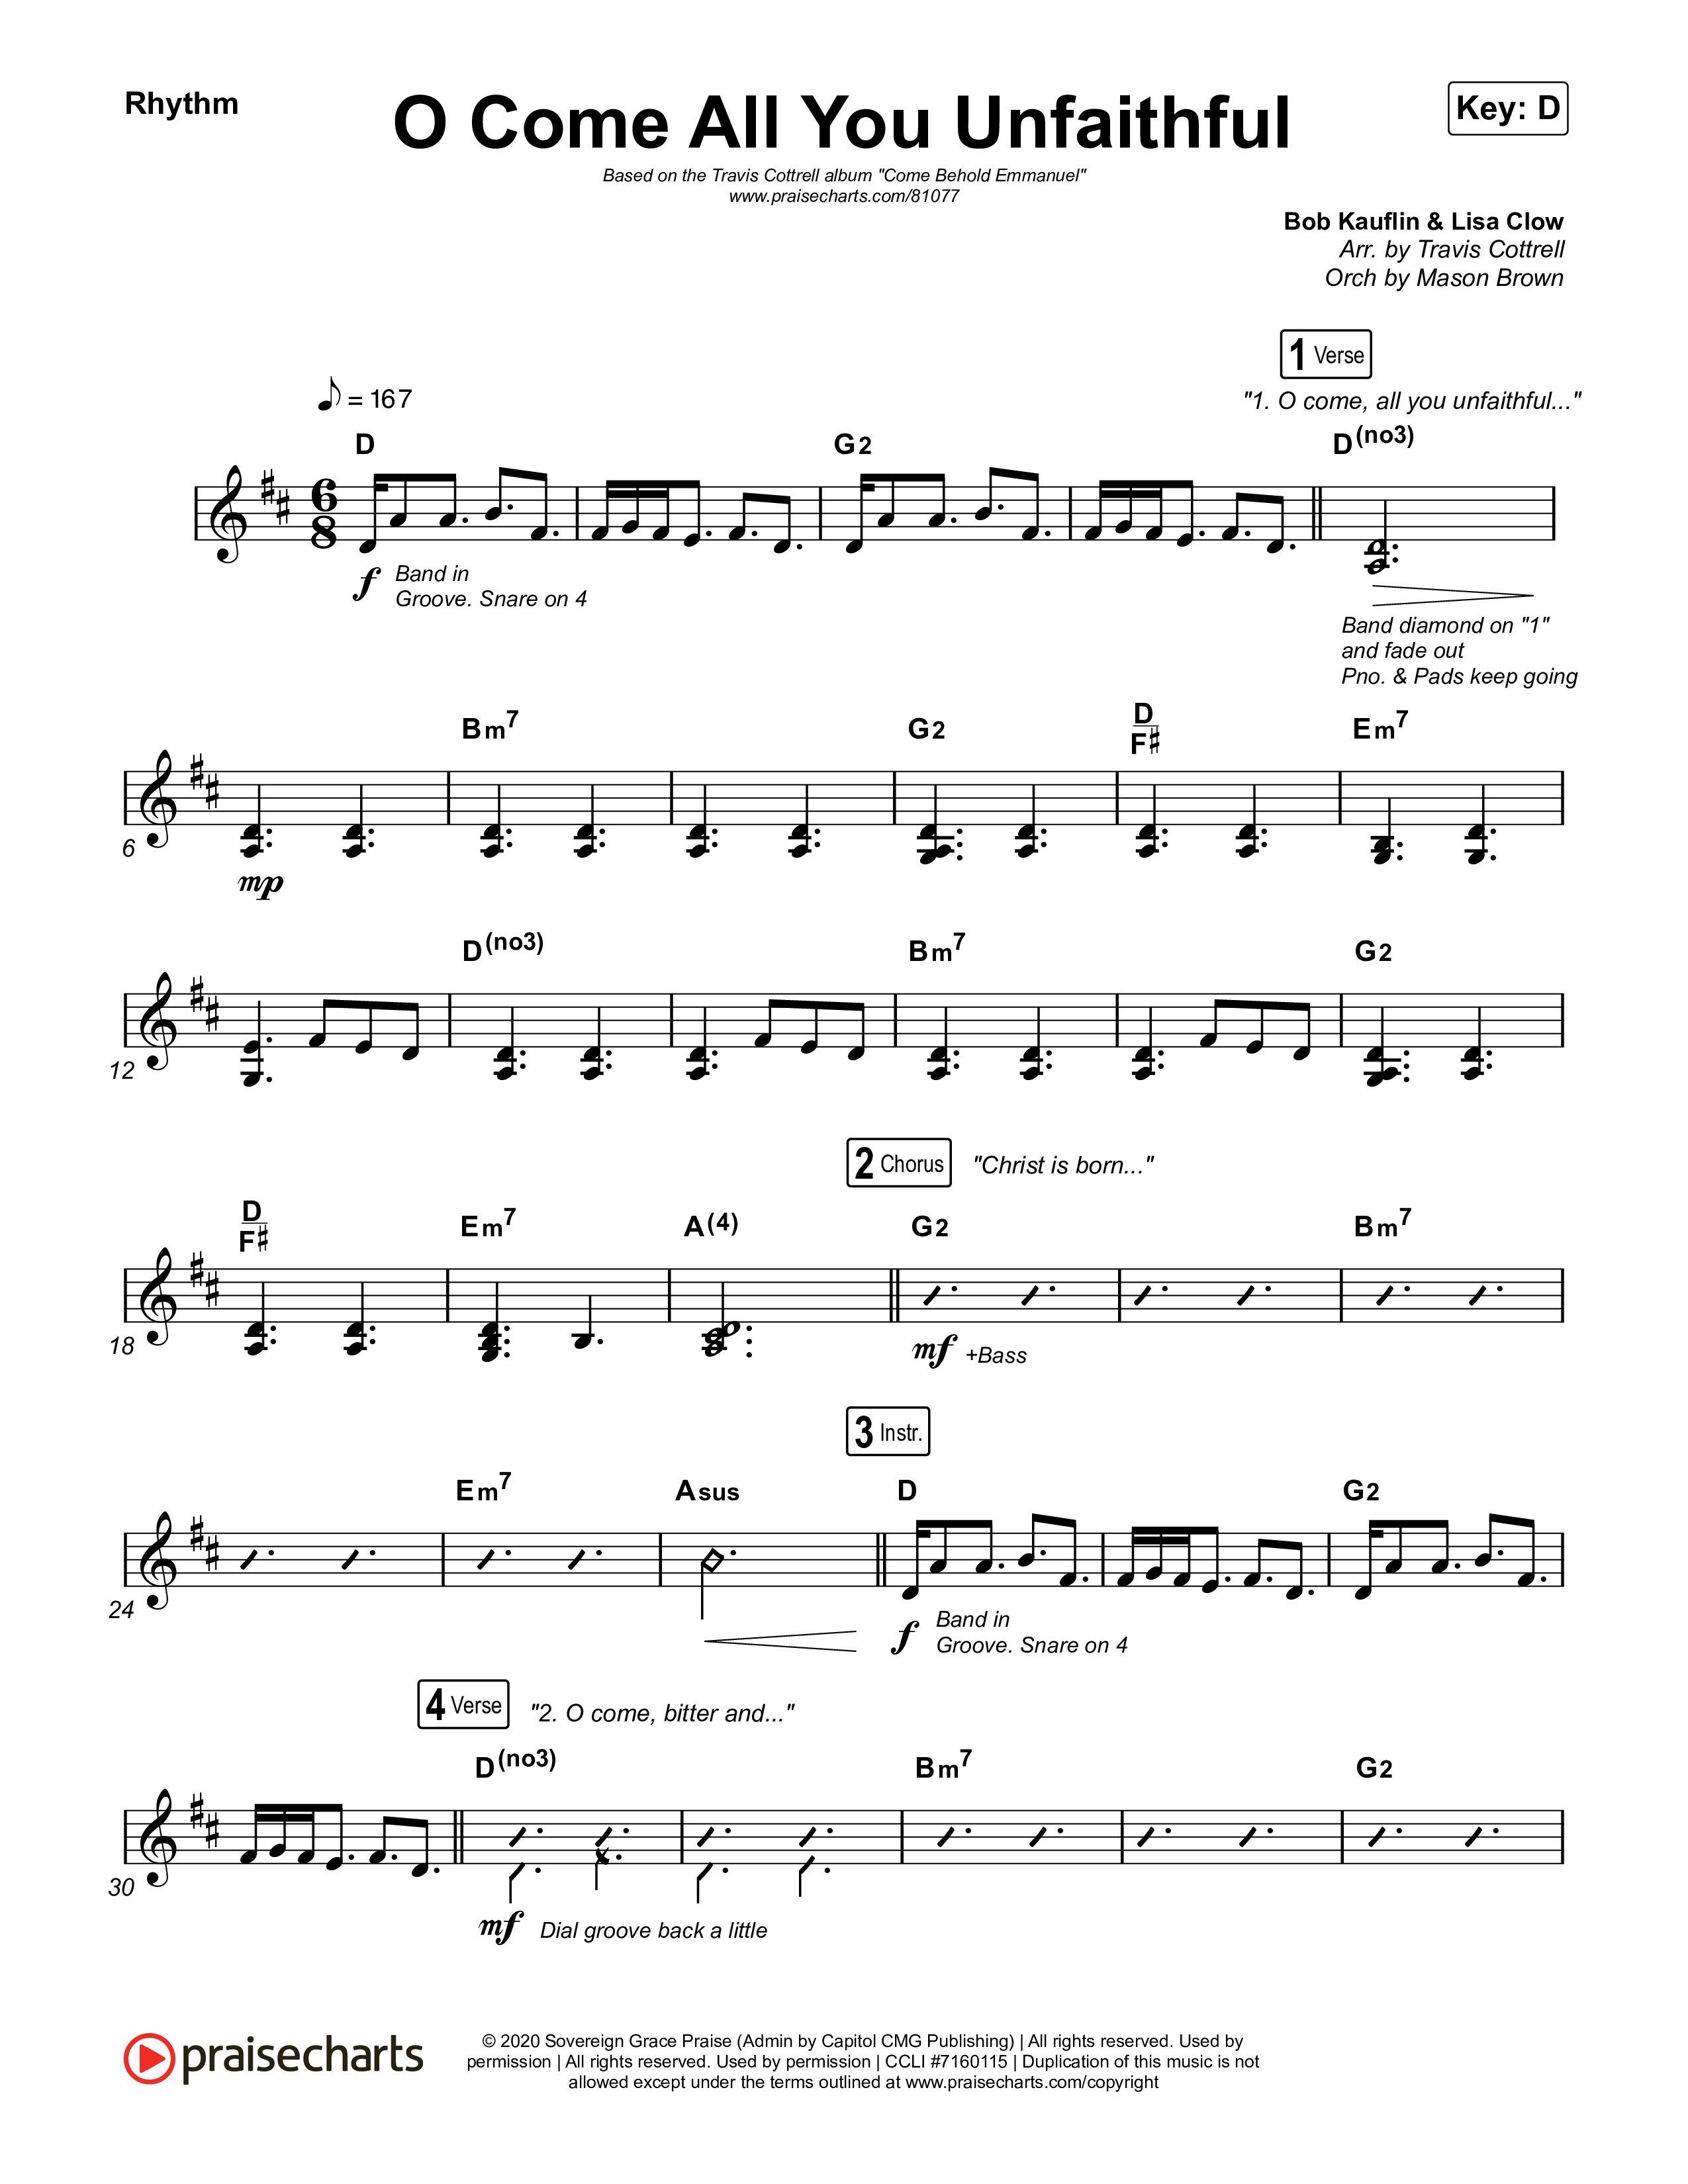 O Come All You Unfaithful Rhythm Chart (Brooke Voland / Arr. Travis Cottrell / Orch. Mason Brown)